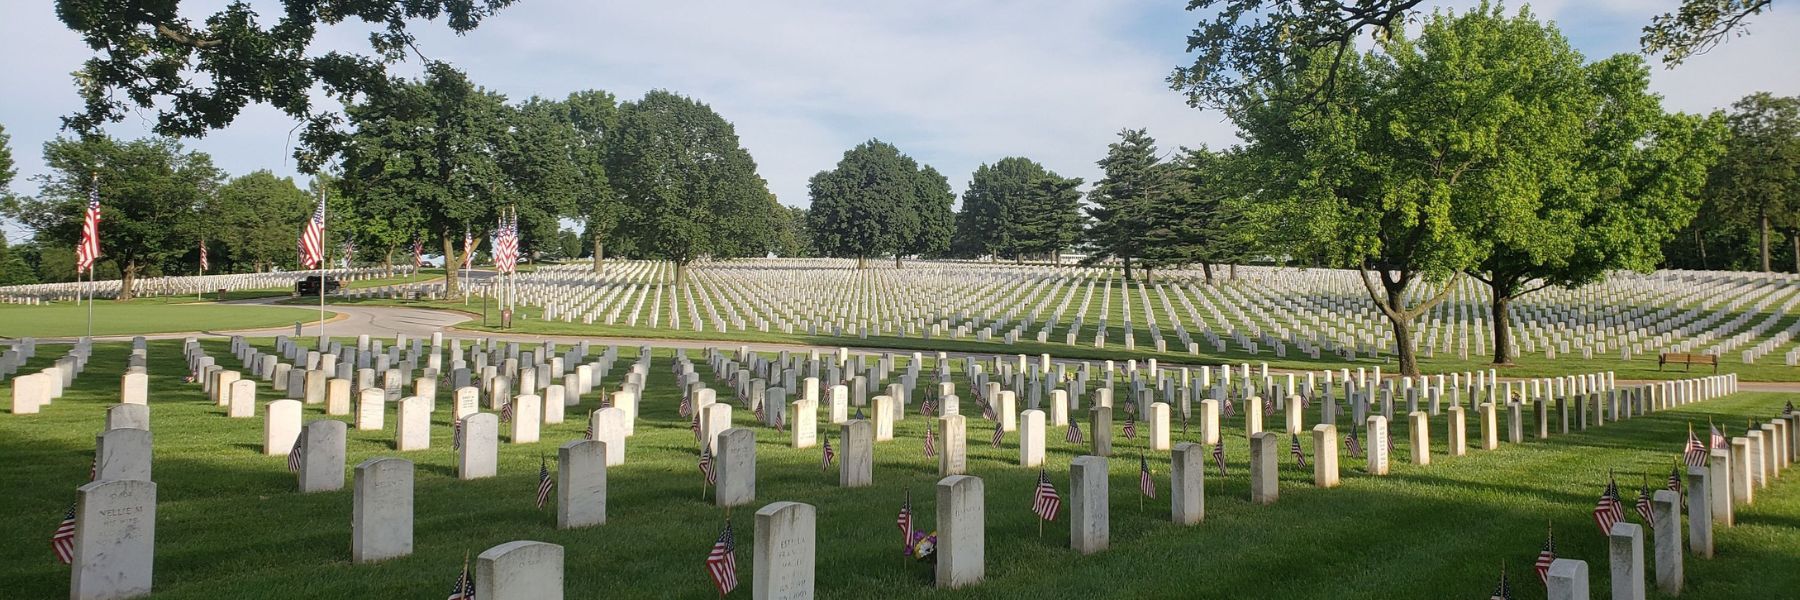 Jefferson Barracks National Cemetery preserves St. Louis’ fascinating role in U.S. military history.